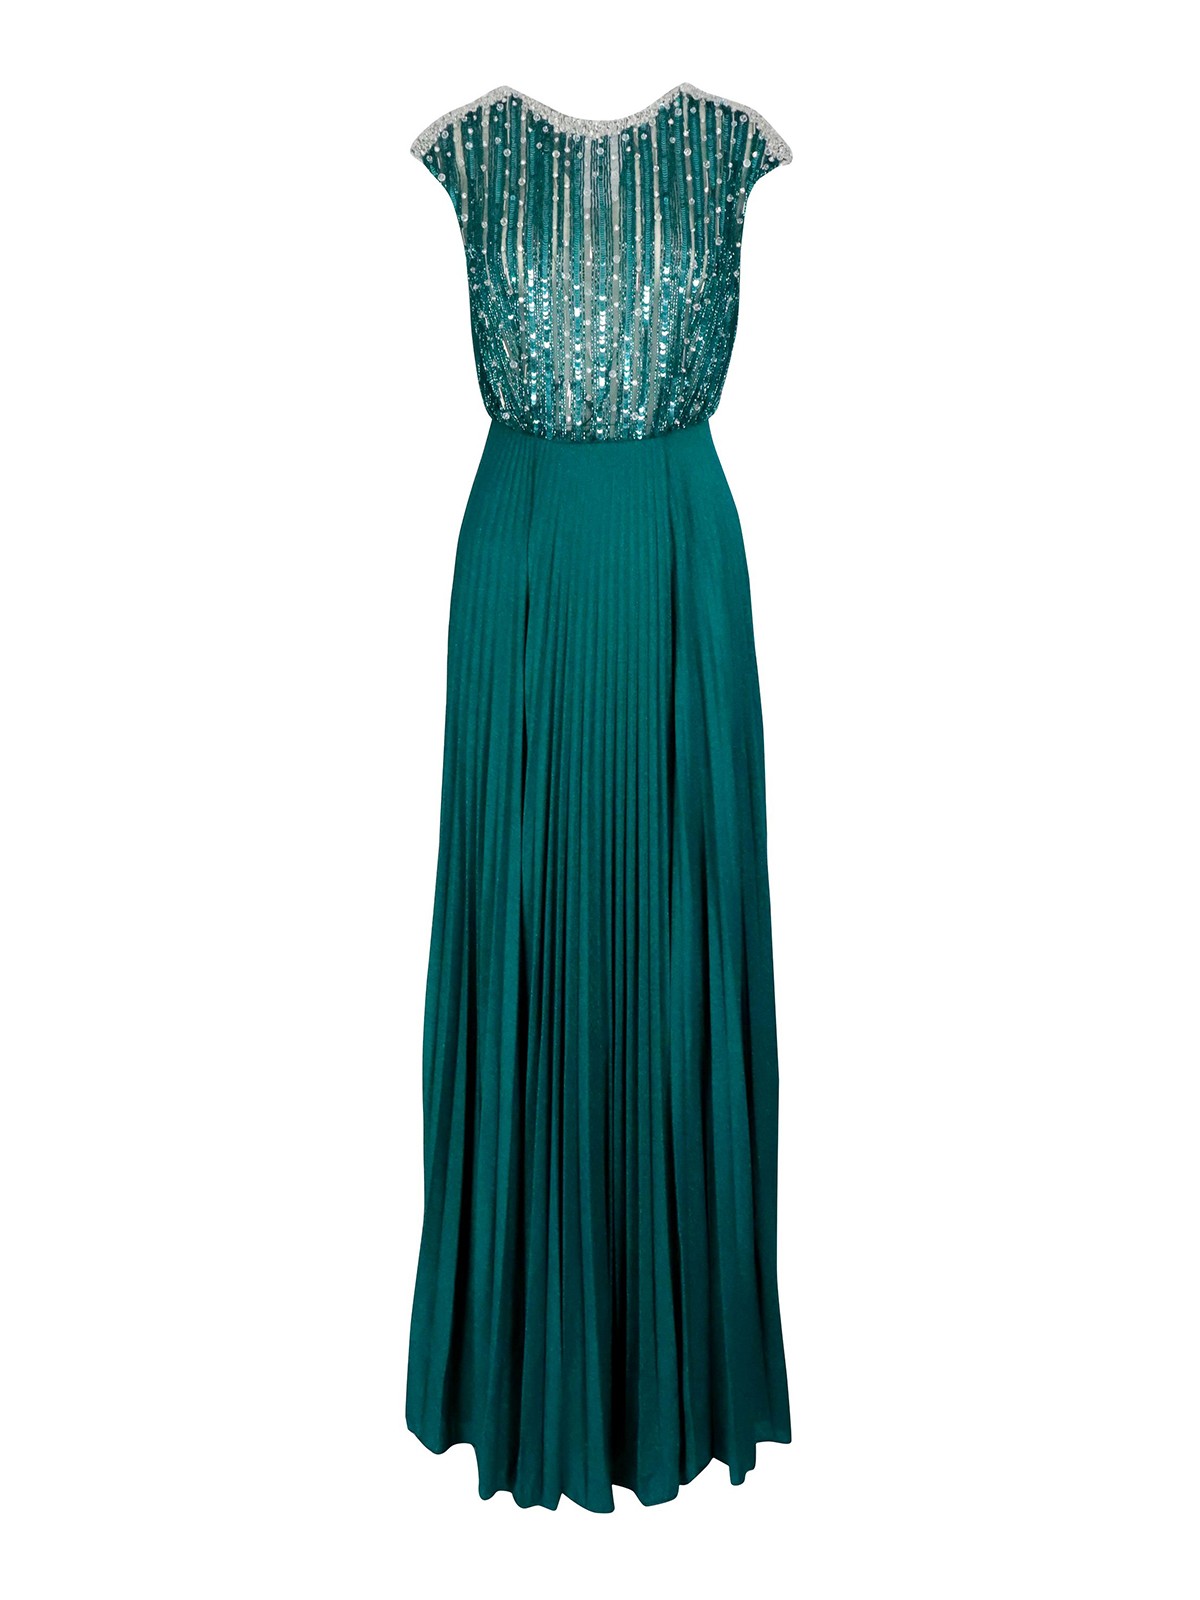 ELISABETTA FRANCHI SEQUINED AND BEADED PLEATED DRESS